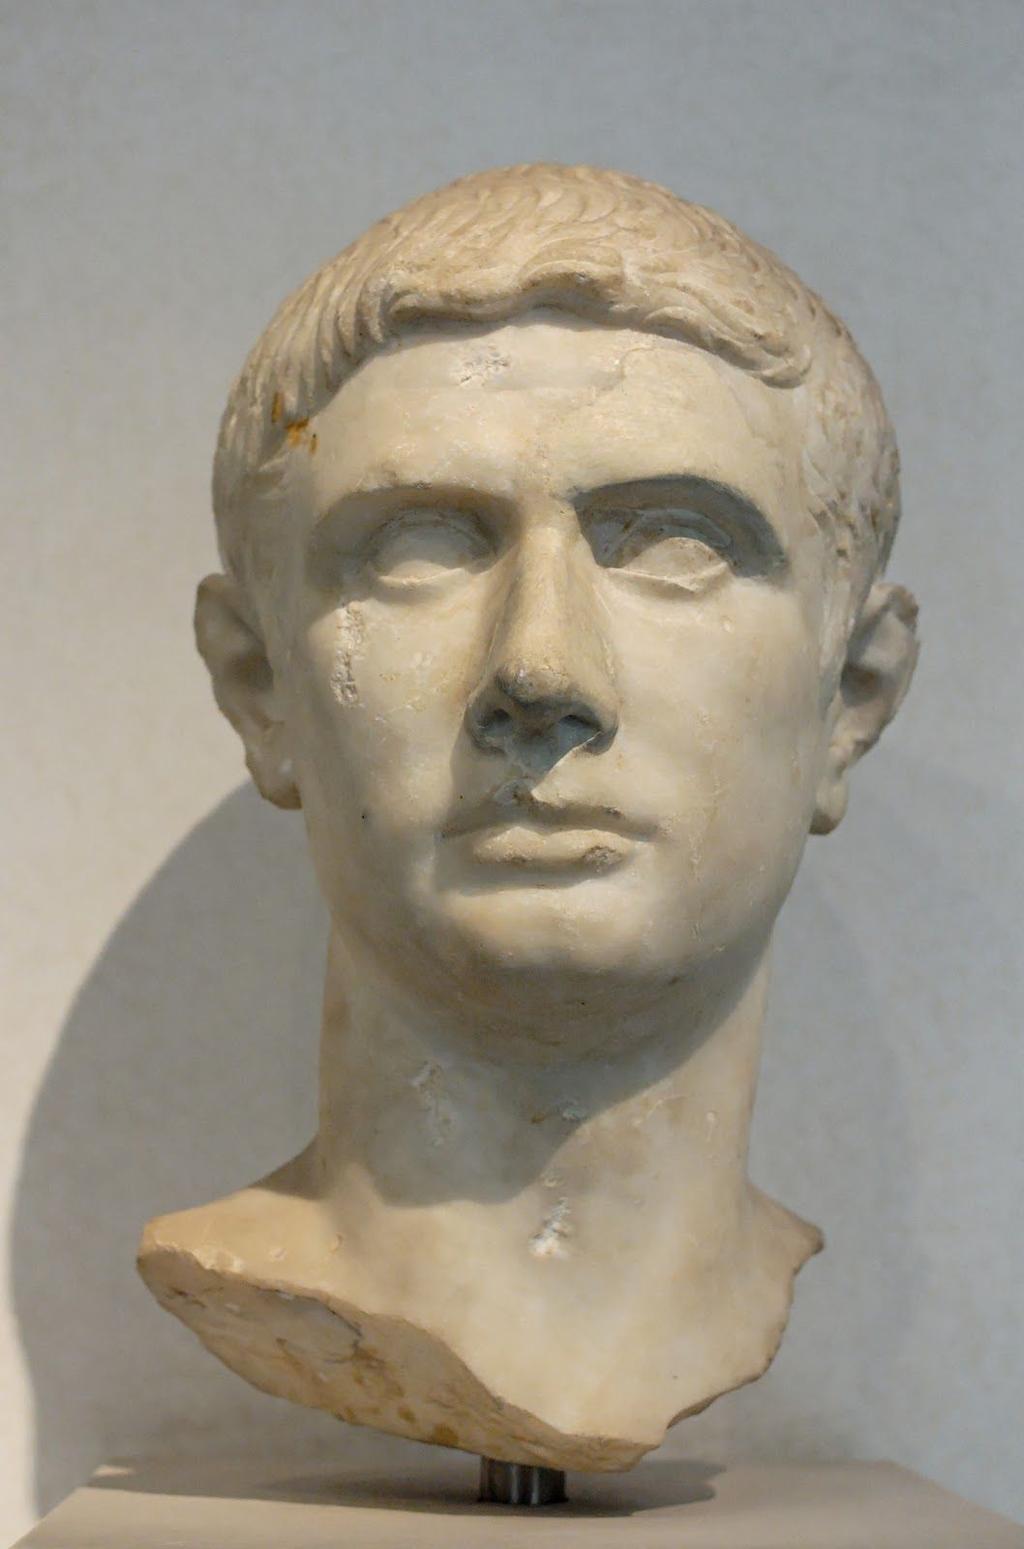 Octavian Octavian is the adopted son of Caesar and his adoptive father has groomed him as a political ally and successor.